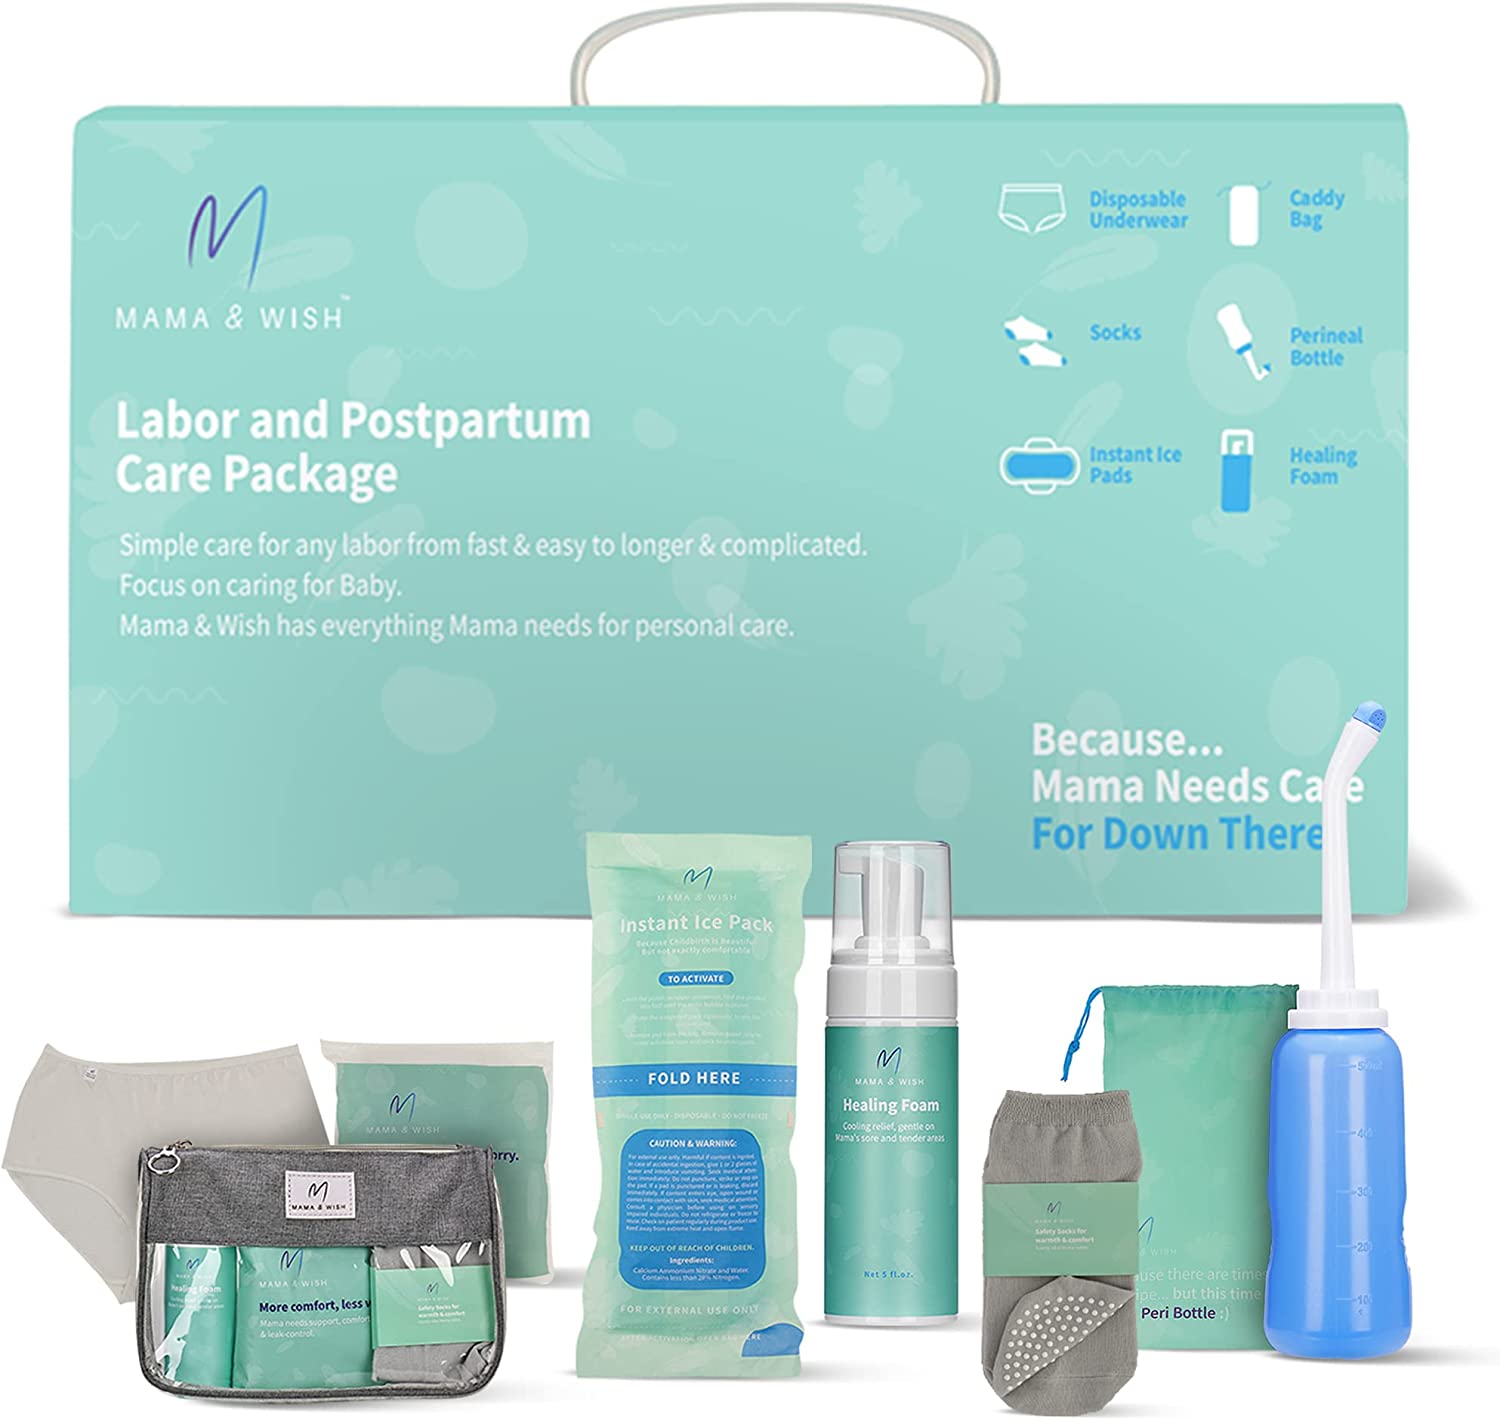 Postpartum Recovery Essentials Kit for Labor and Delivery, Grownsy  All-in-One Kit Includes PERI Bottle, Herbal Cooling Spray, Herbal Cooling  Liners, Hot and Cold Packs, and Disposable Underwear, by Soldeland